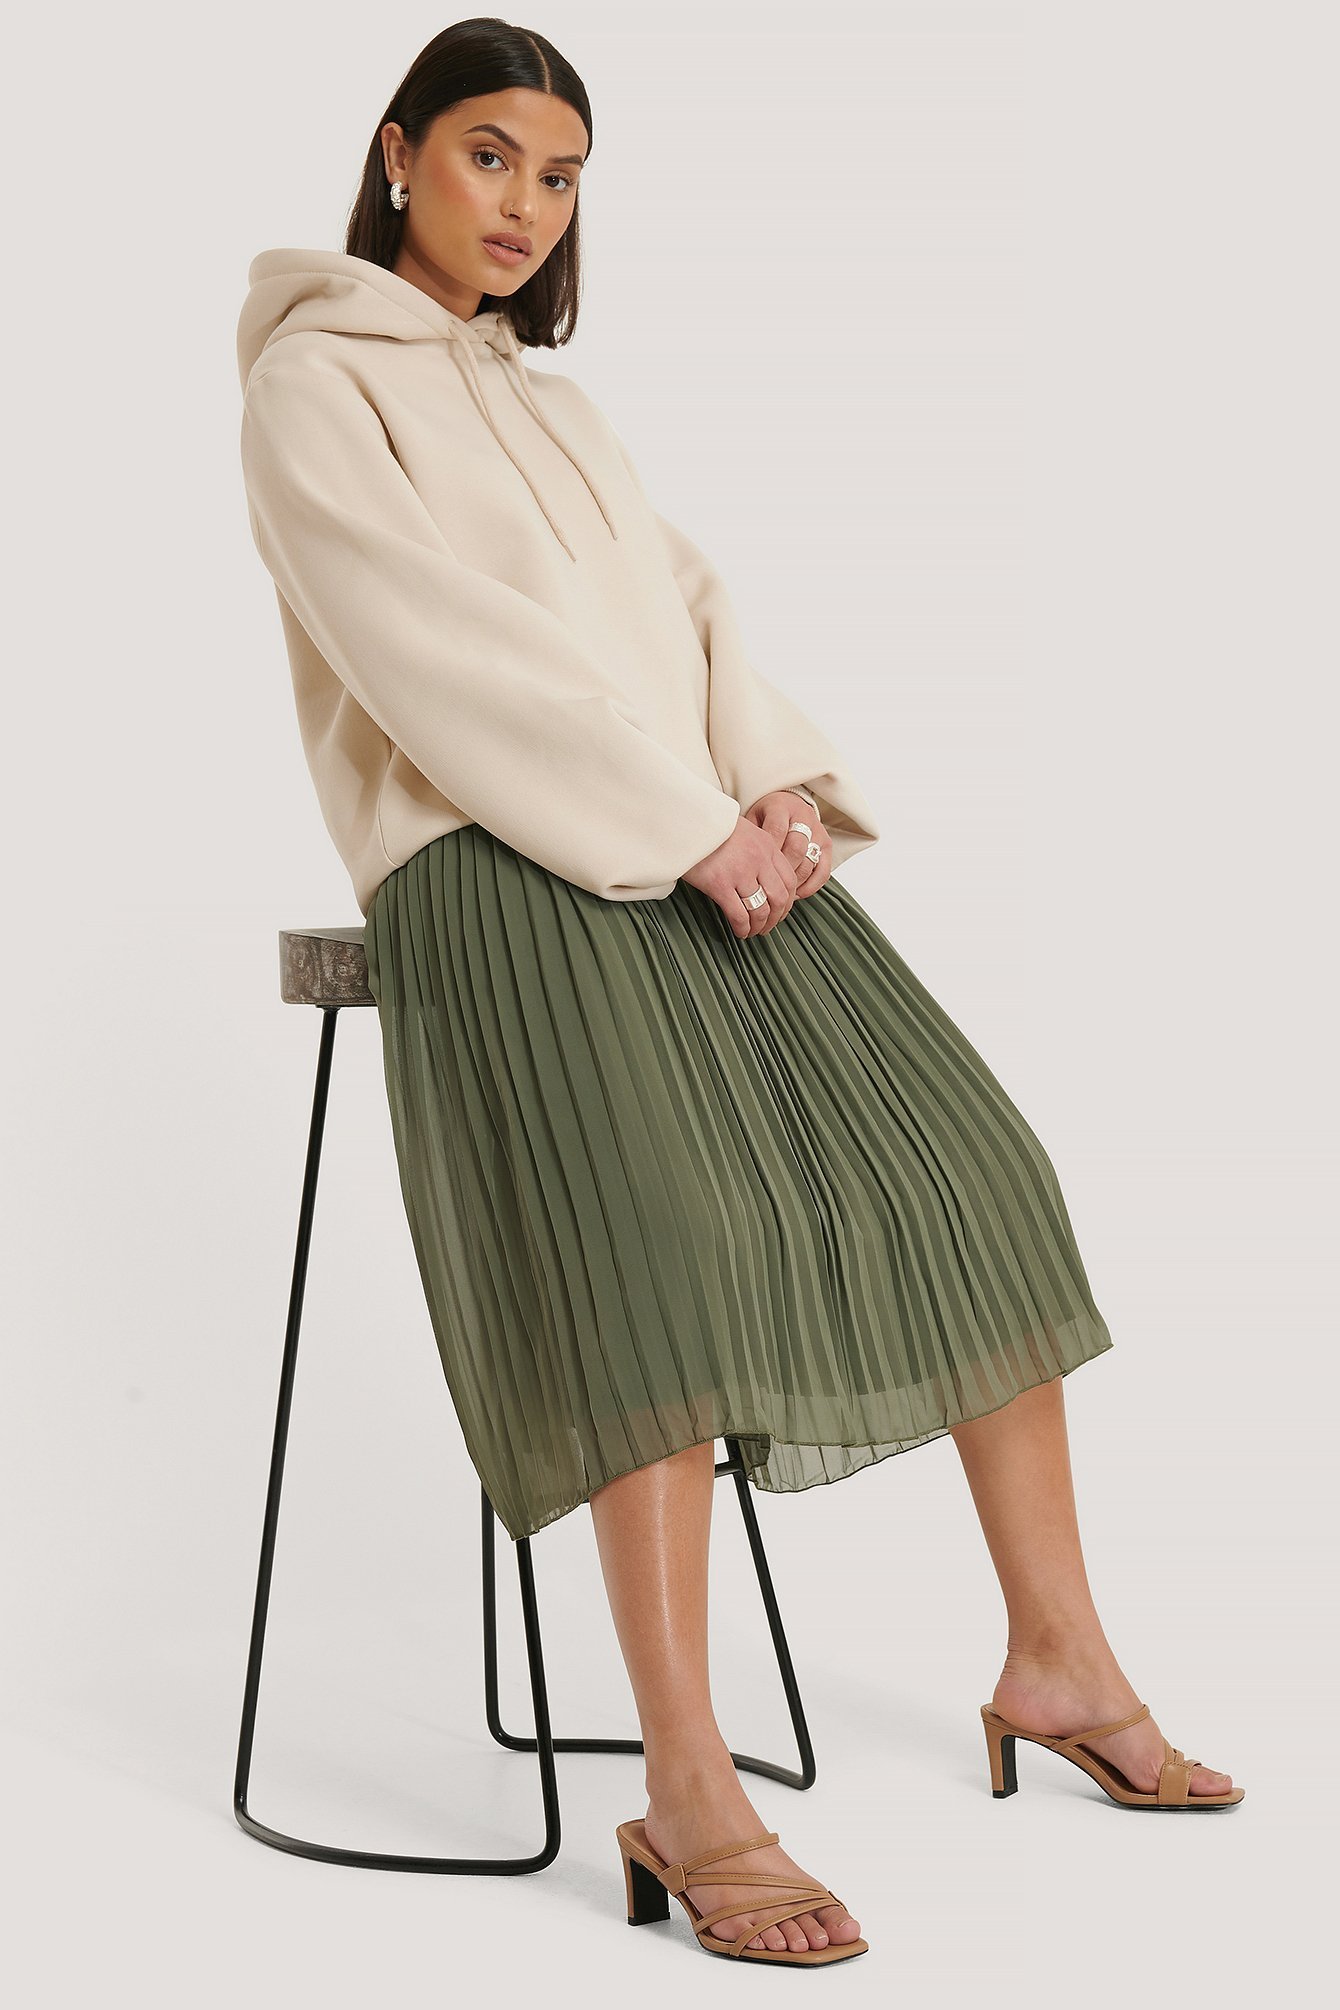 Pleated Midi Skirt Outfit.